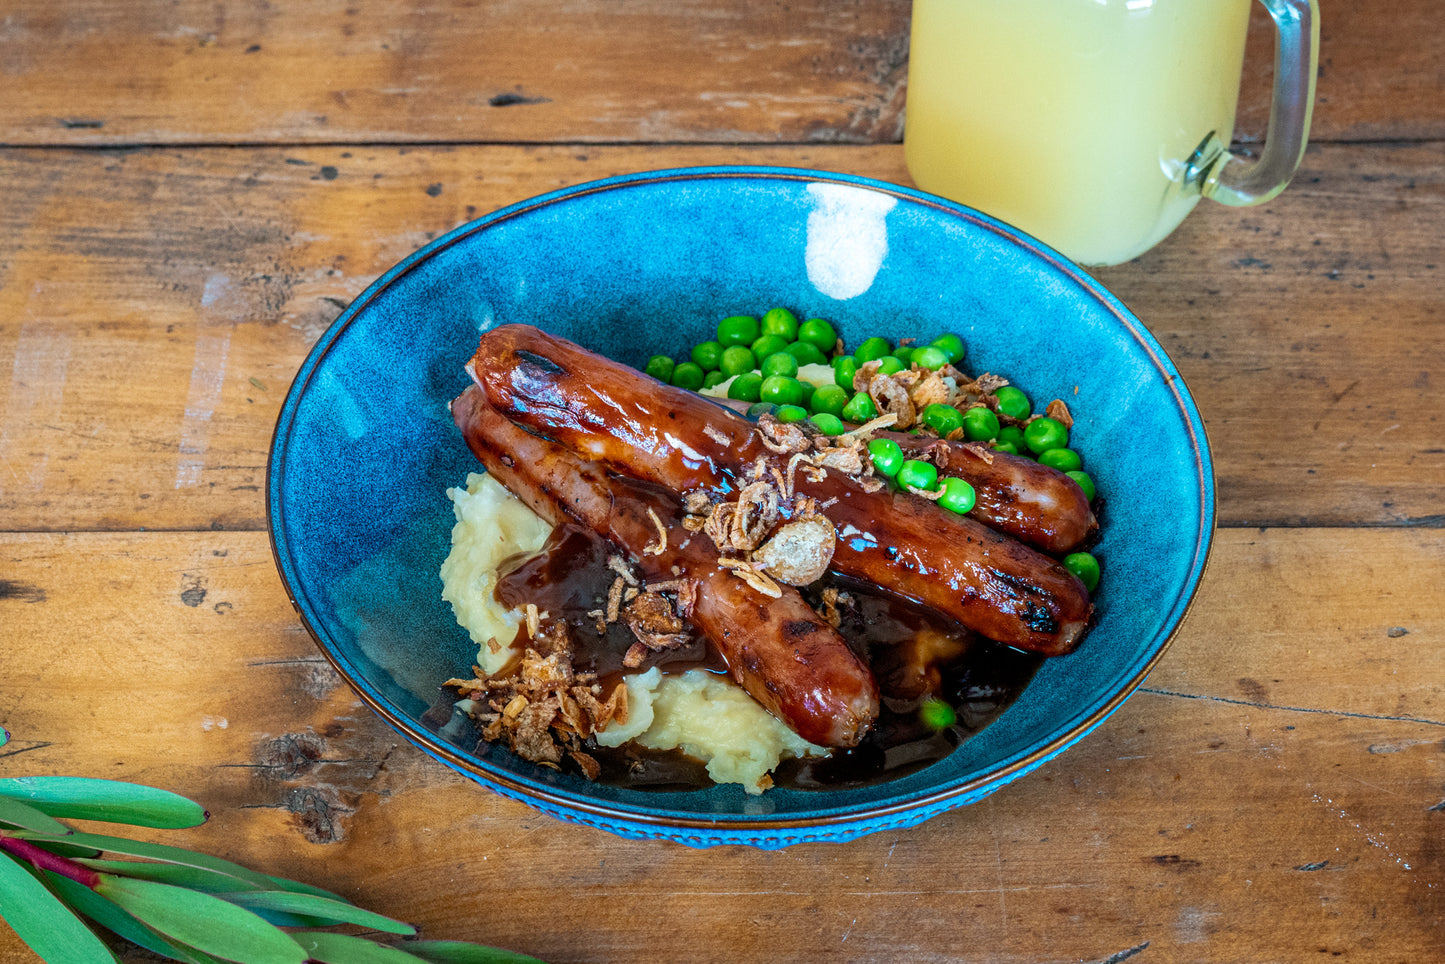 A photo of Bearded Dragon Hotel's signature dish, Bangers and Mash served with Peas and Crispy Onions